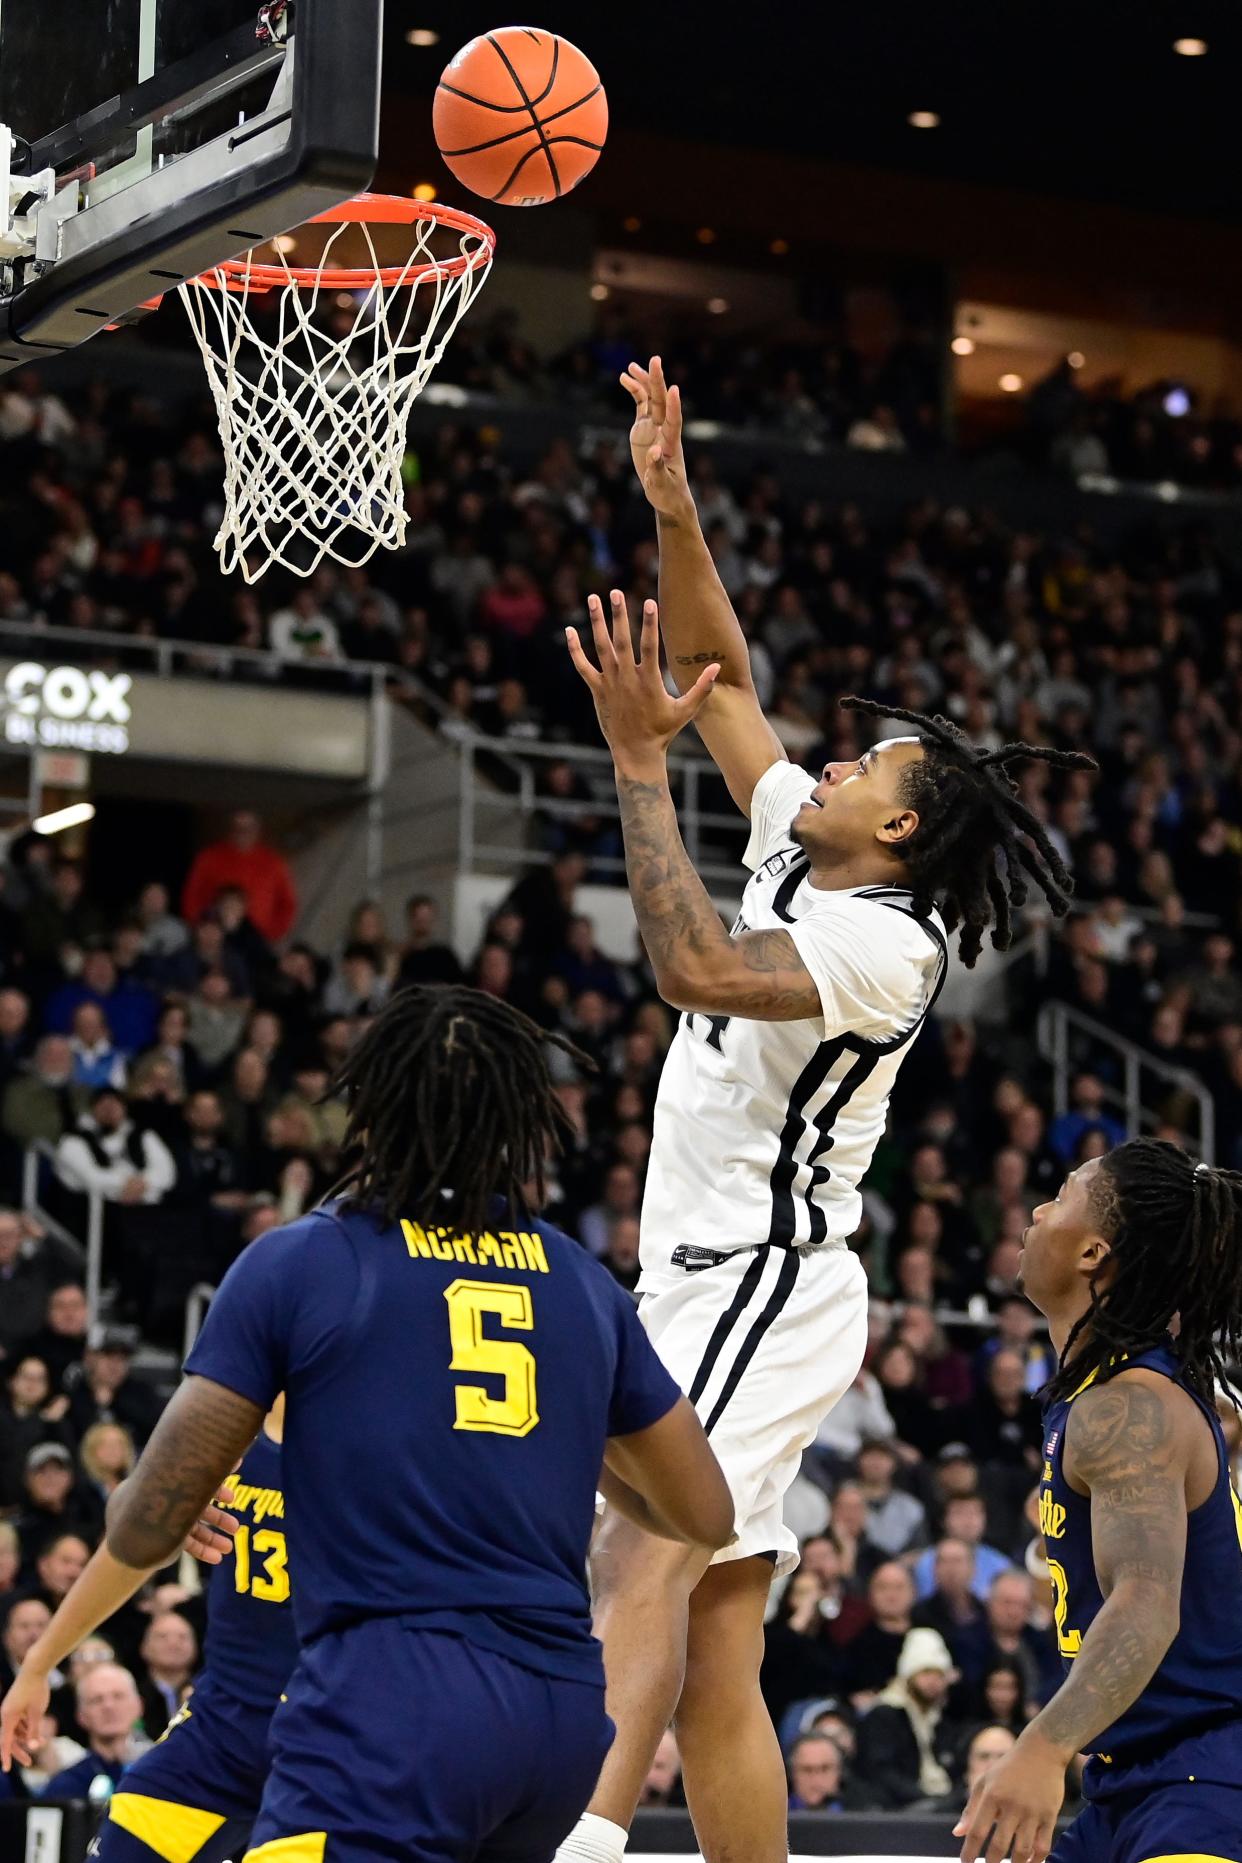 Dec 19, 2023; Providence, Rhode Island, USA; Providence Friars guard Corey Floyd Jr. (14) shoots during the first half against the Marquette Golden Eagles at Amica Mutual Pavilion. Mandatory Credit: Eric Canha-USA TODAY Sports